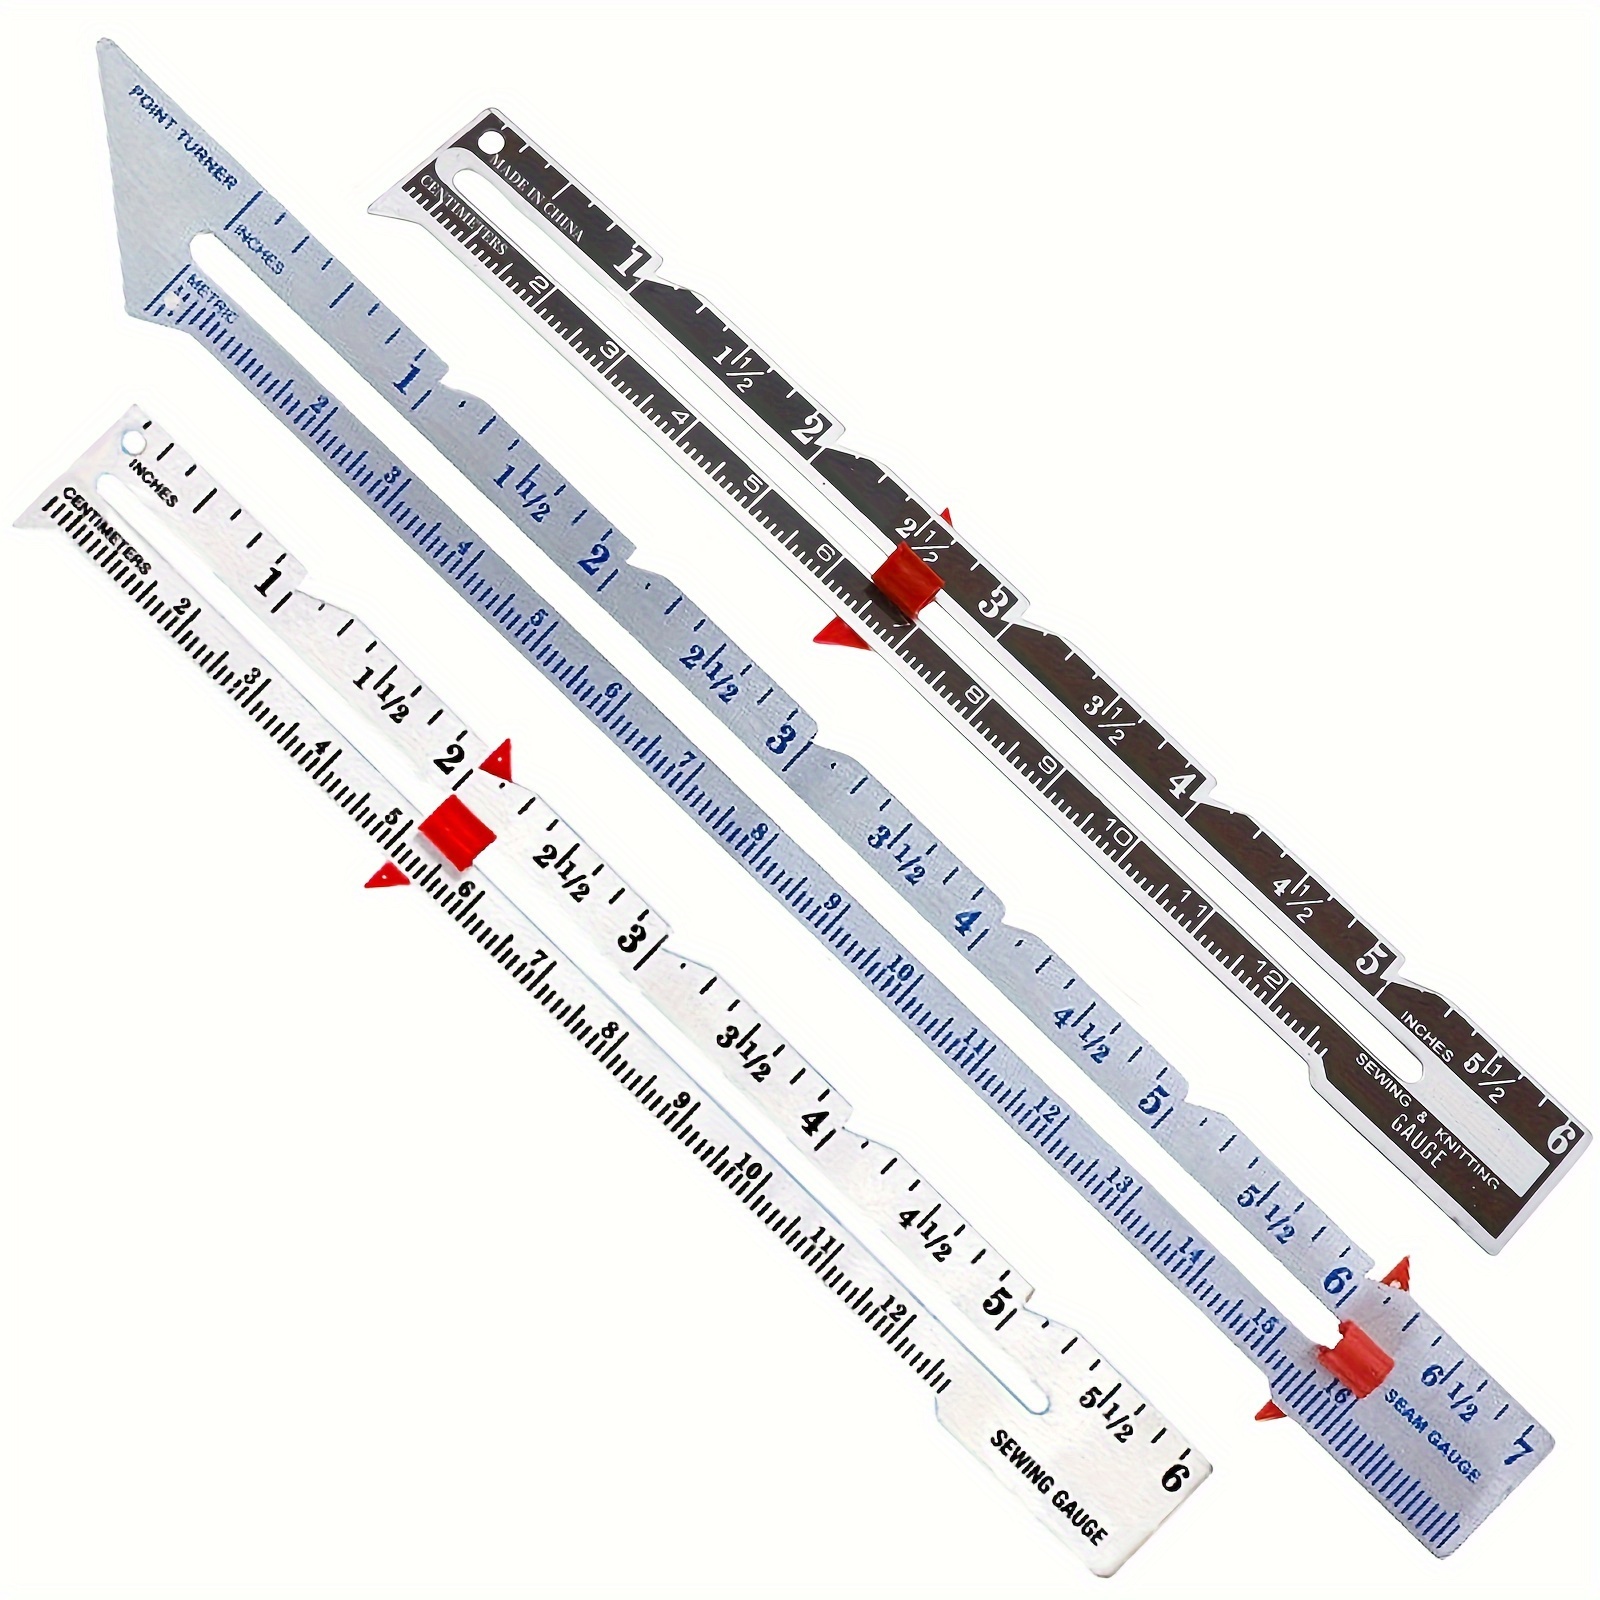 Tegg Sewing Gauge Aluminium Alloy Quilting Sliding Ruler Sewing Measuring  Tool With Sliding Adjustable Marker for Knitting Crafting Sewing Hemming